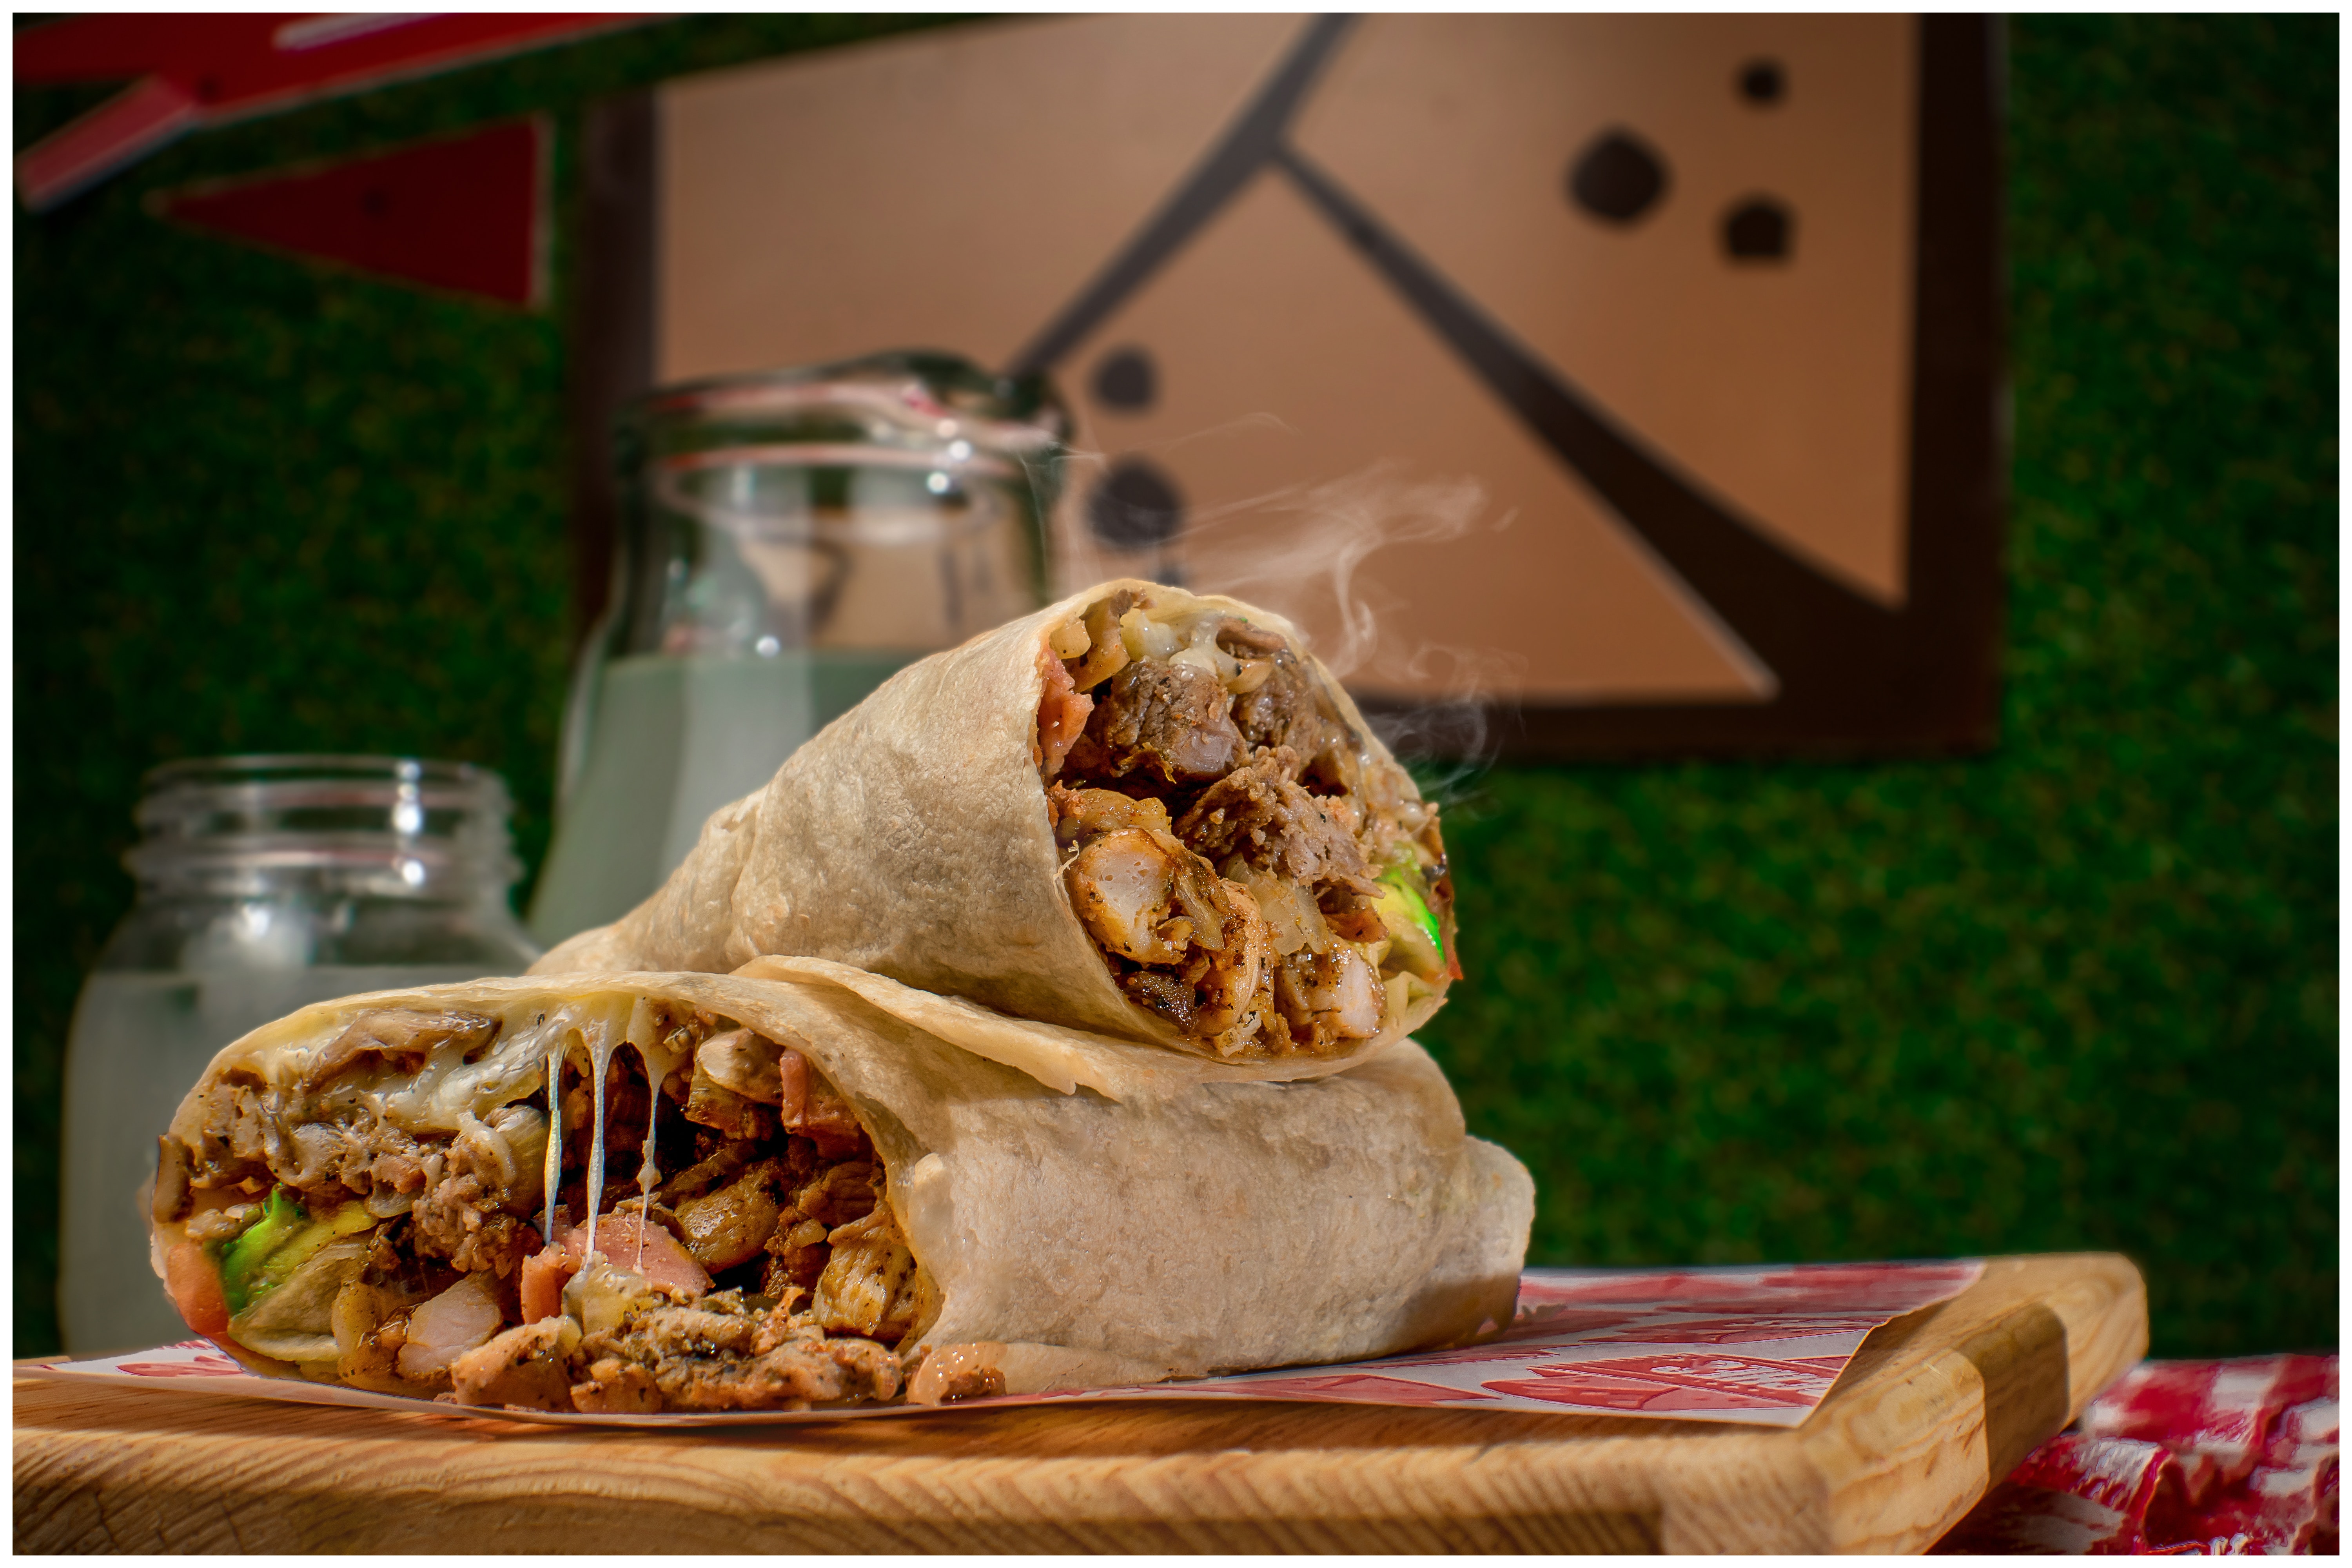 Do You Also Feel That Restaurant Burritos Are Way Better Than Homemade? 